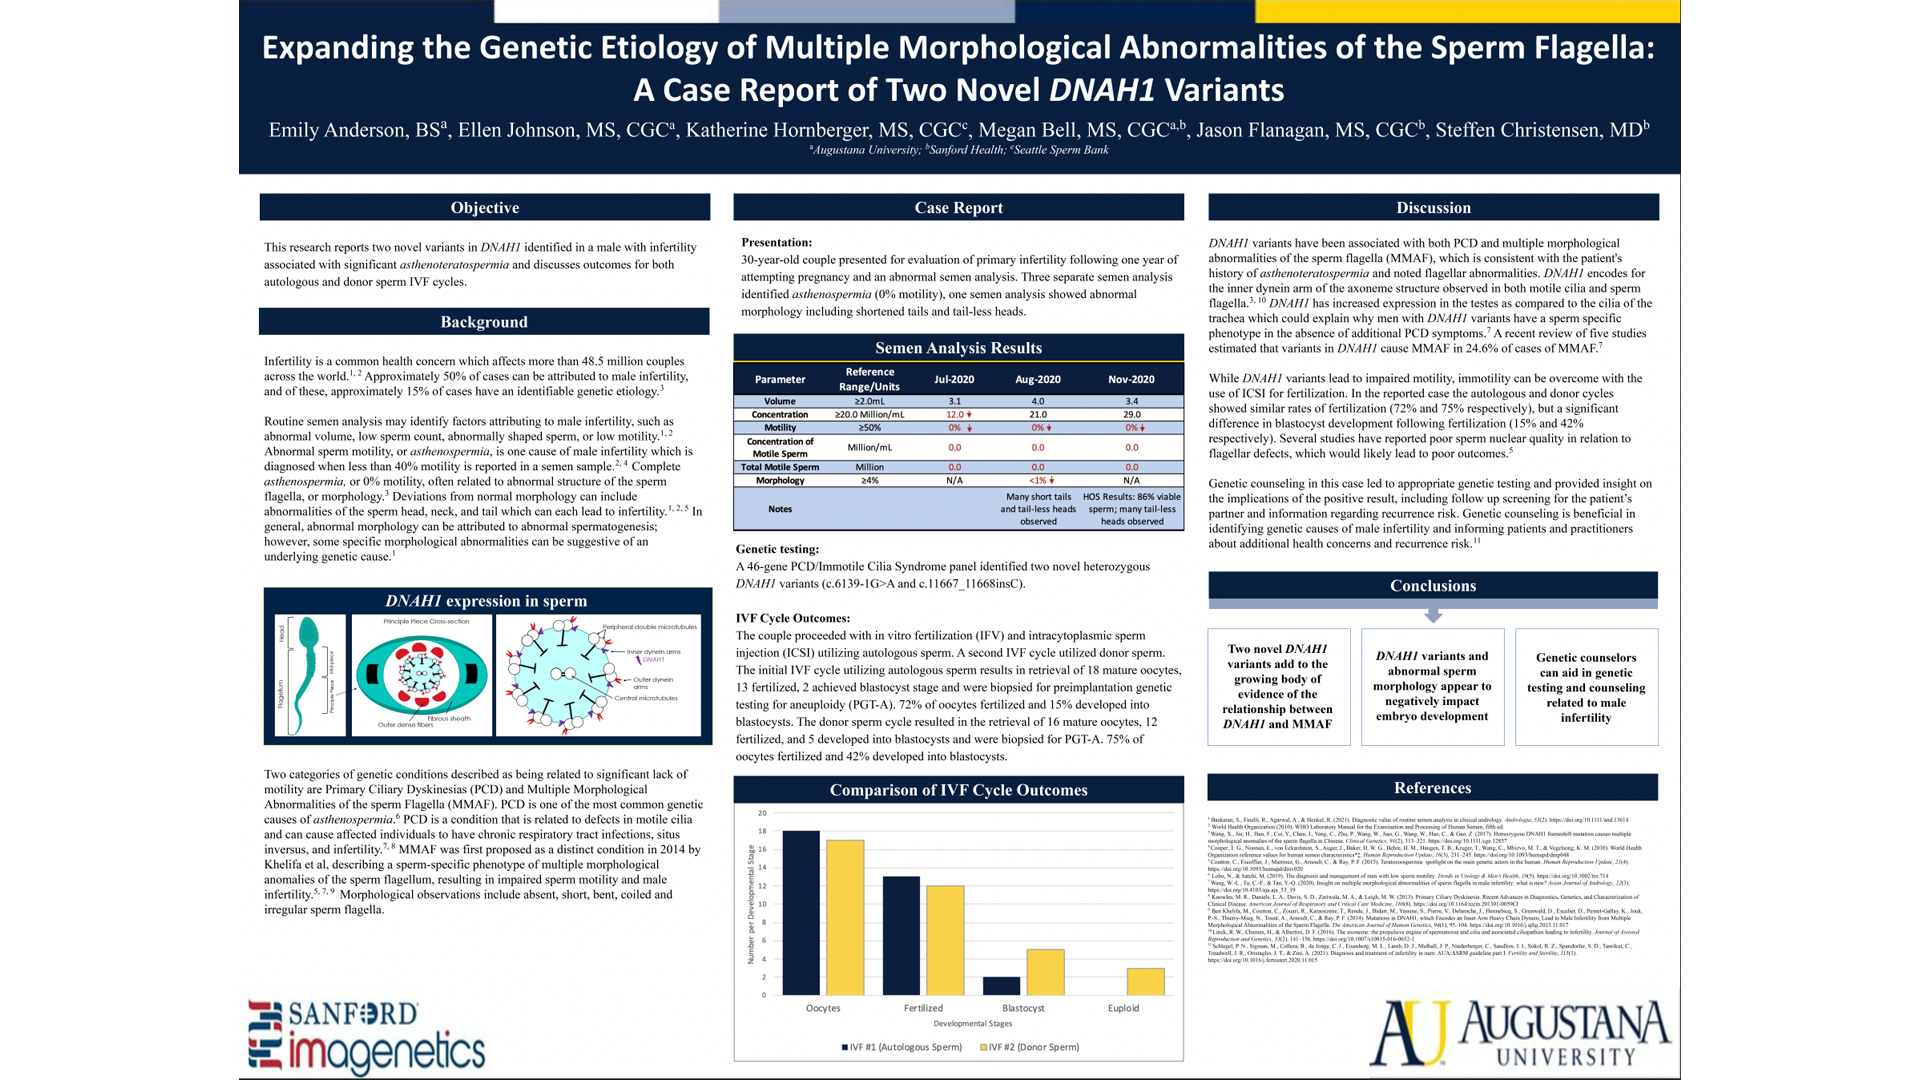 Expanding the Genetic Etiology of Multiple Morphological Abnormalities of the Sperm Flagella: A Case Report of Two Novel DNAH1 Variants Poster